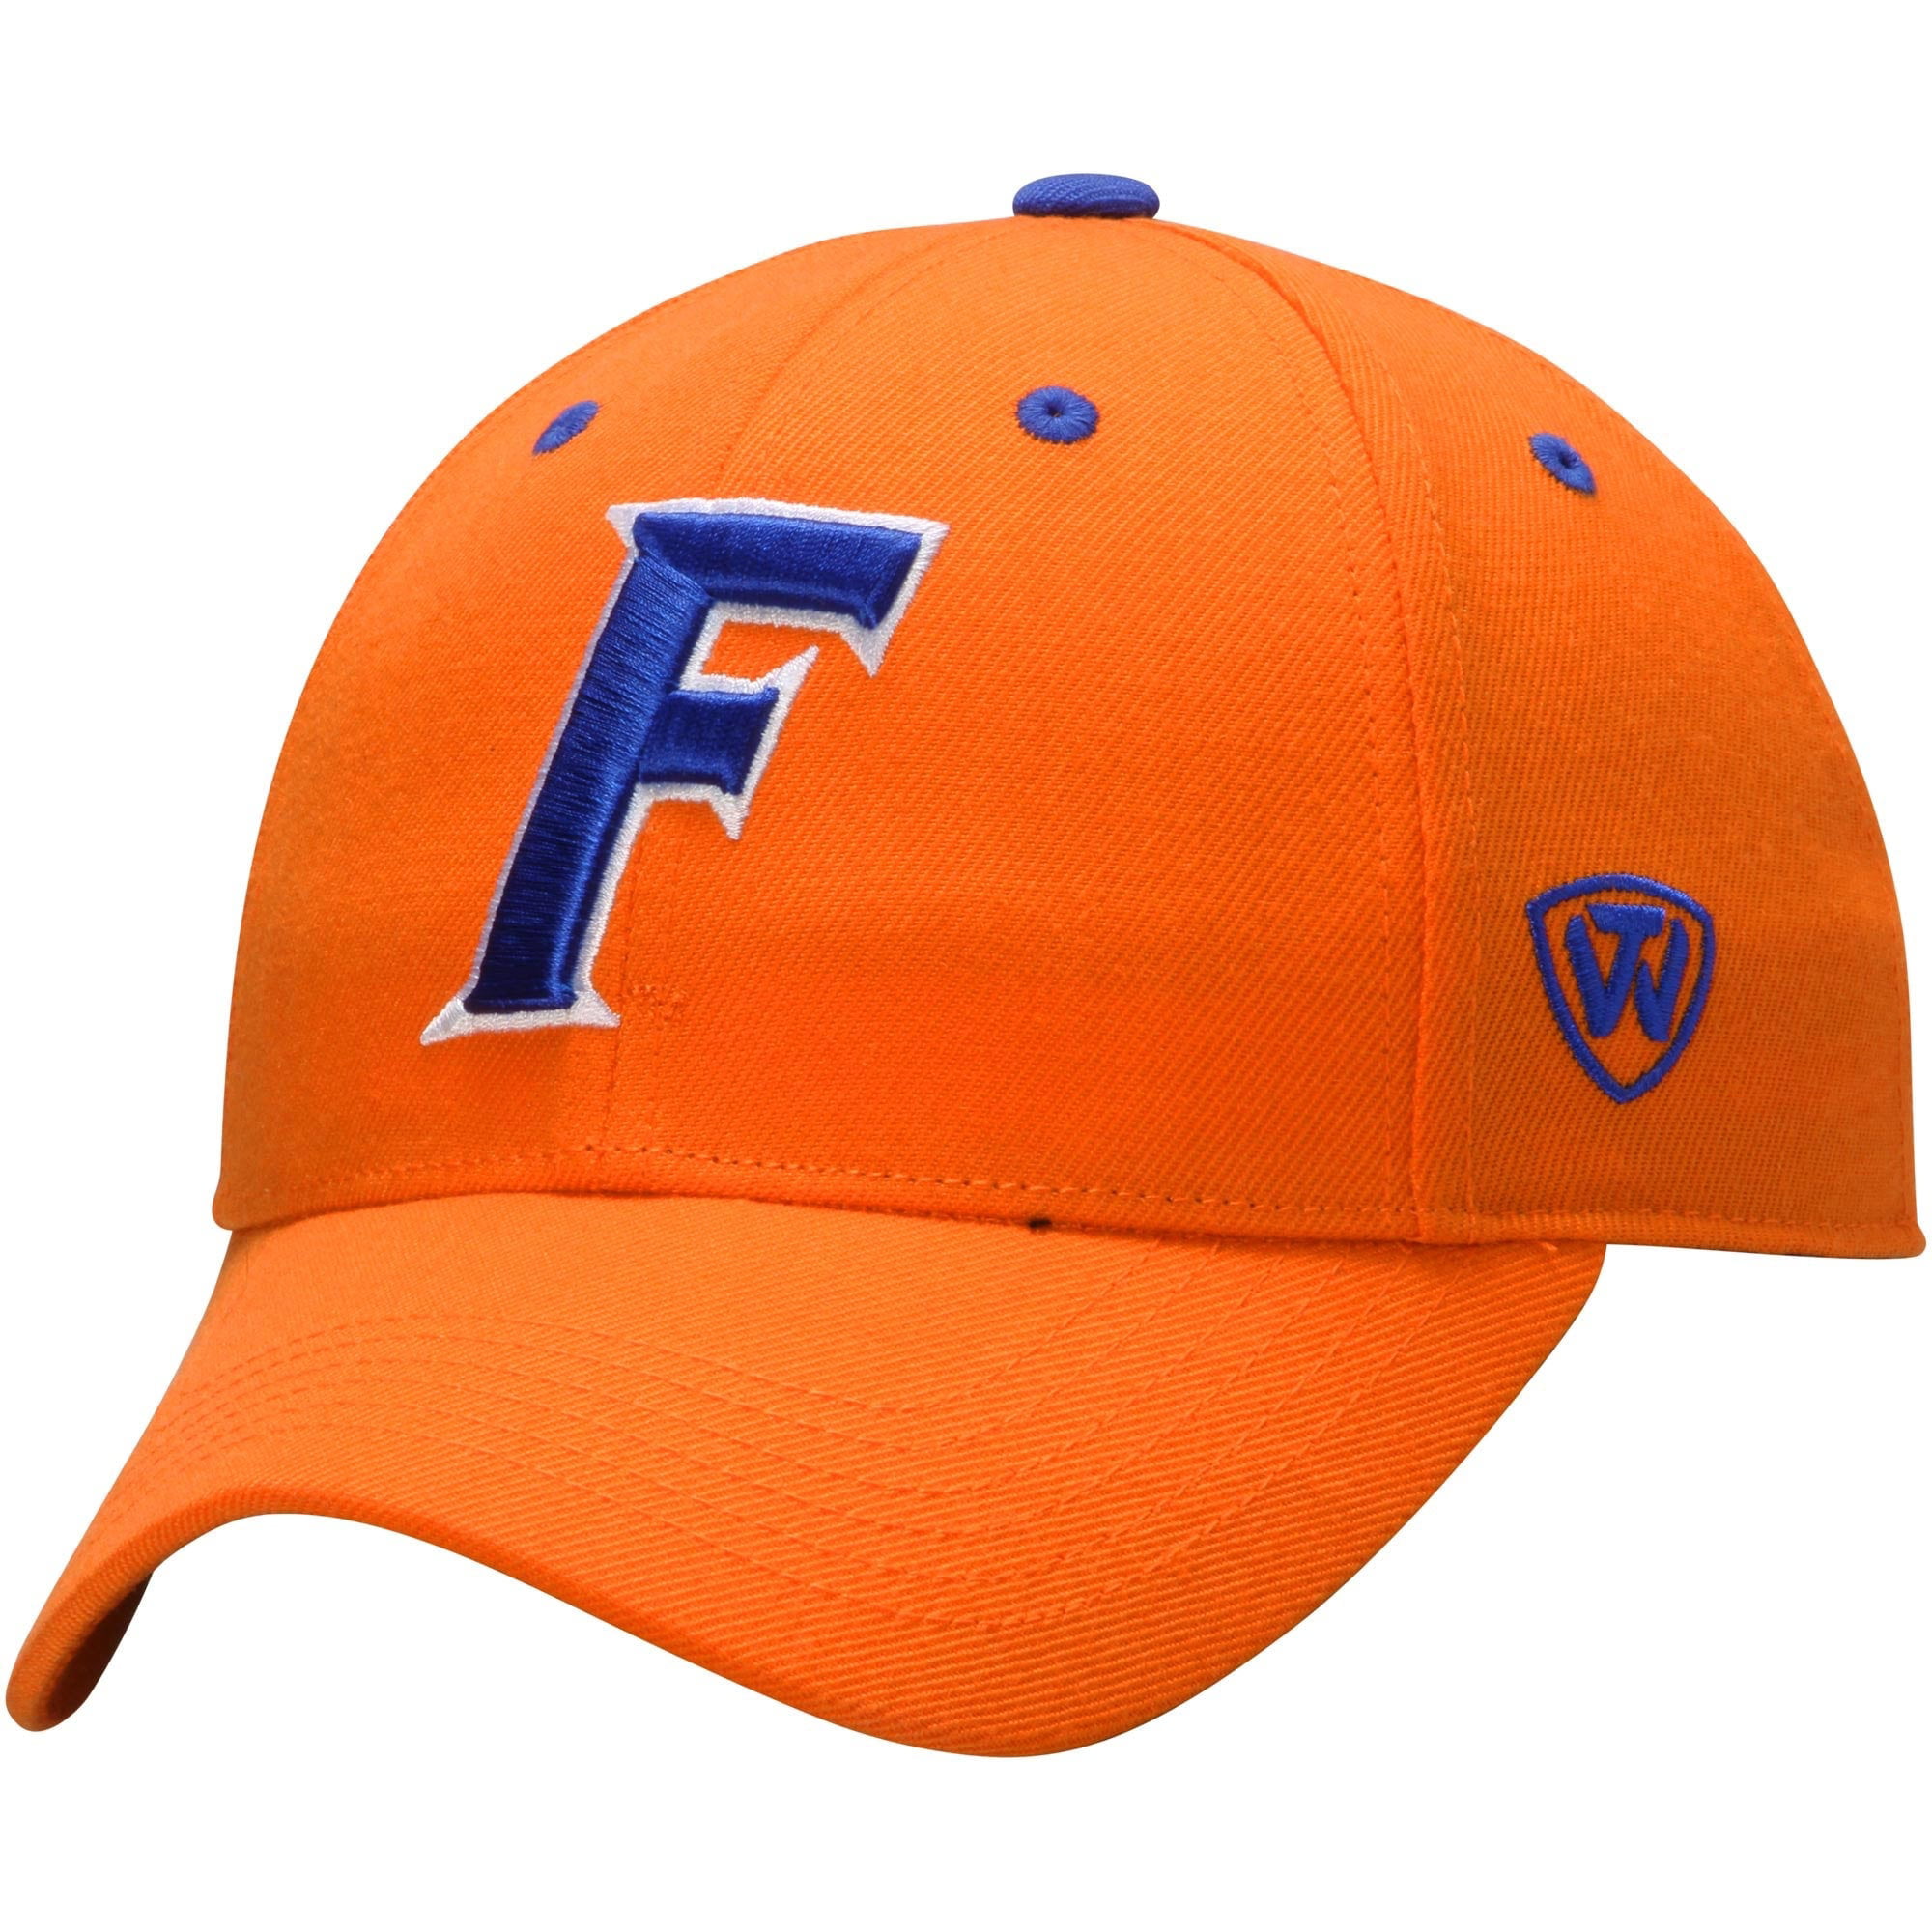 Top of the World NCAA-Dynamic-one-fit-Memory fit-hat Gap